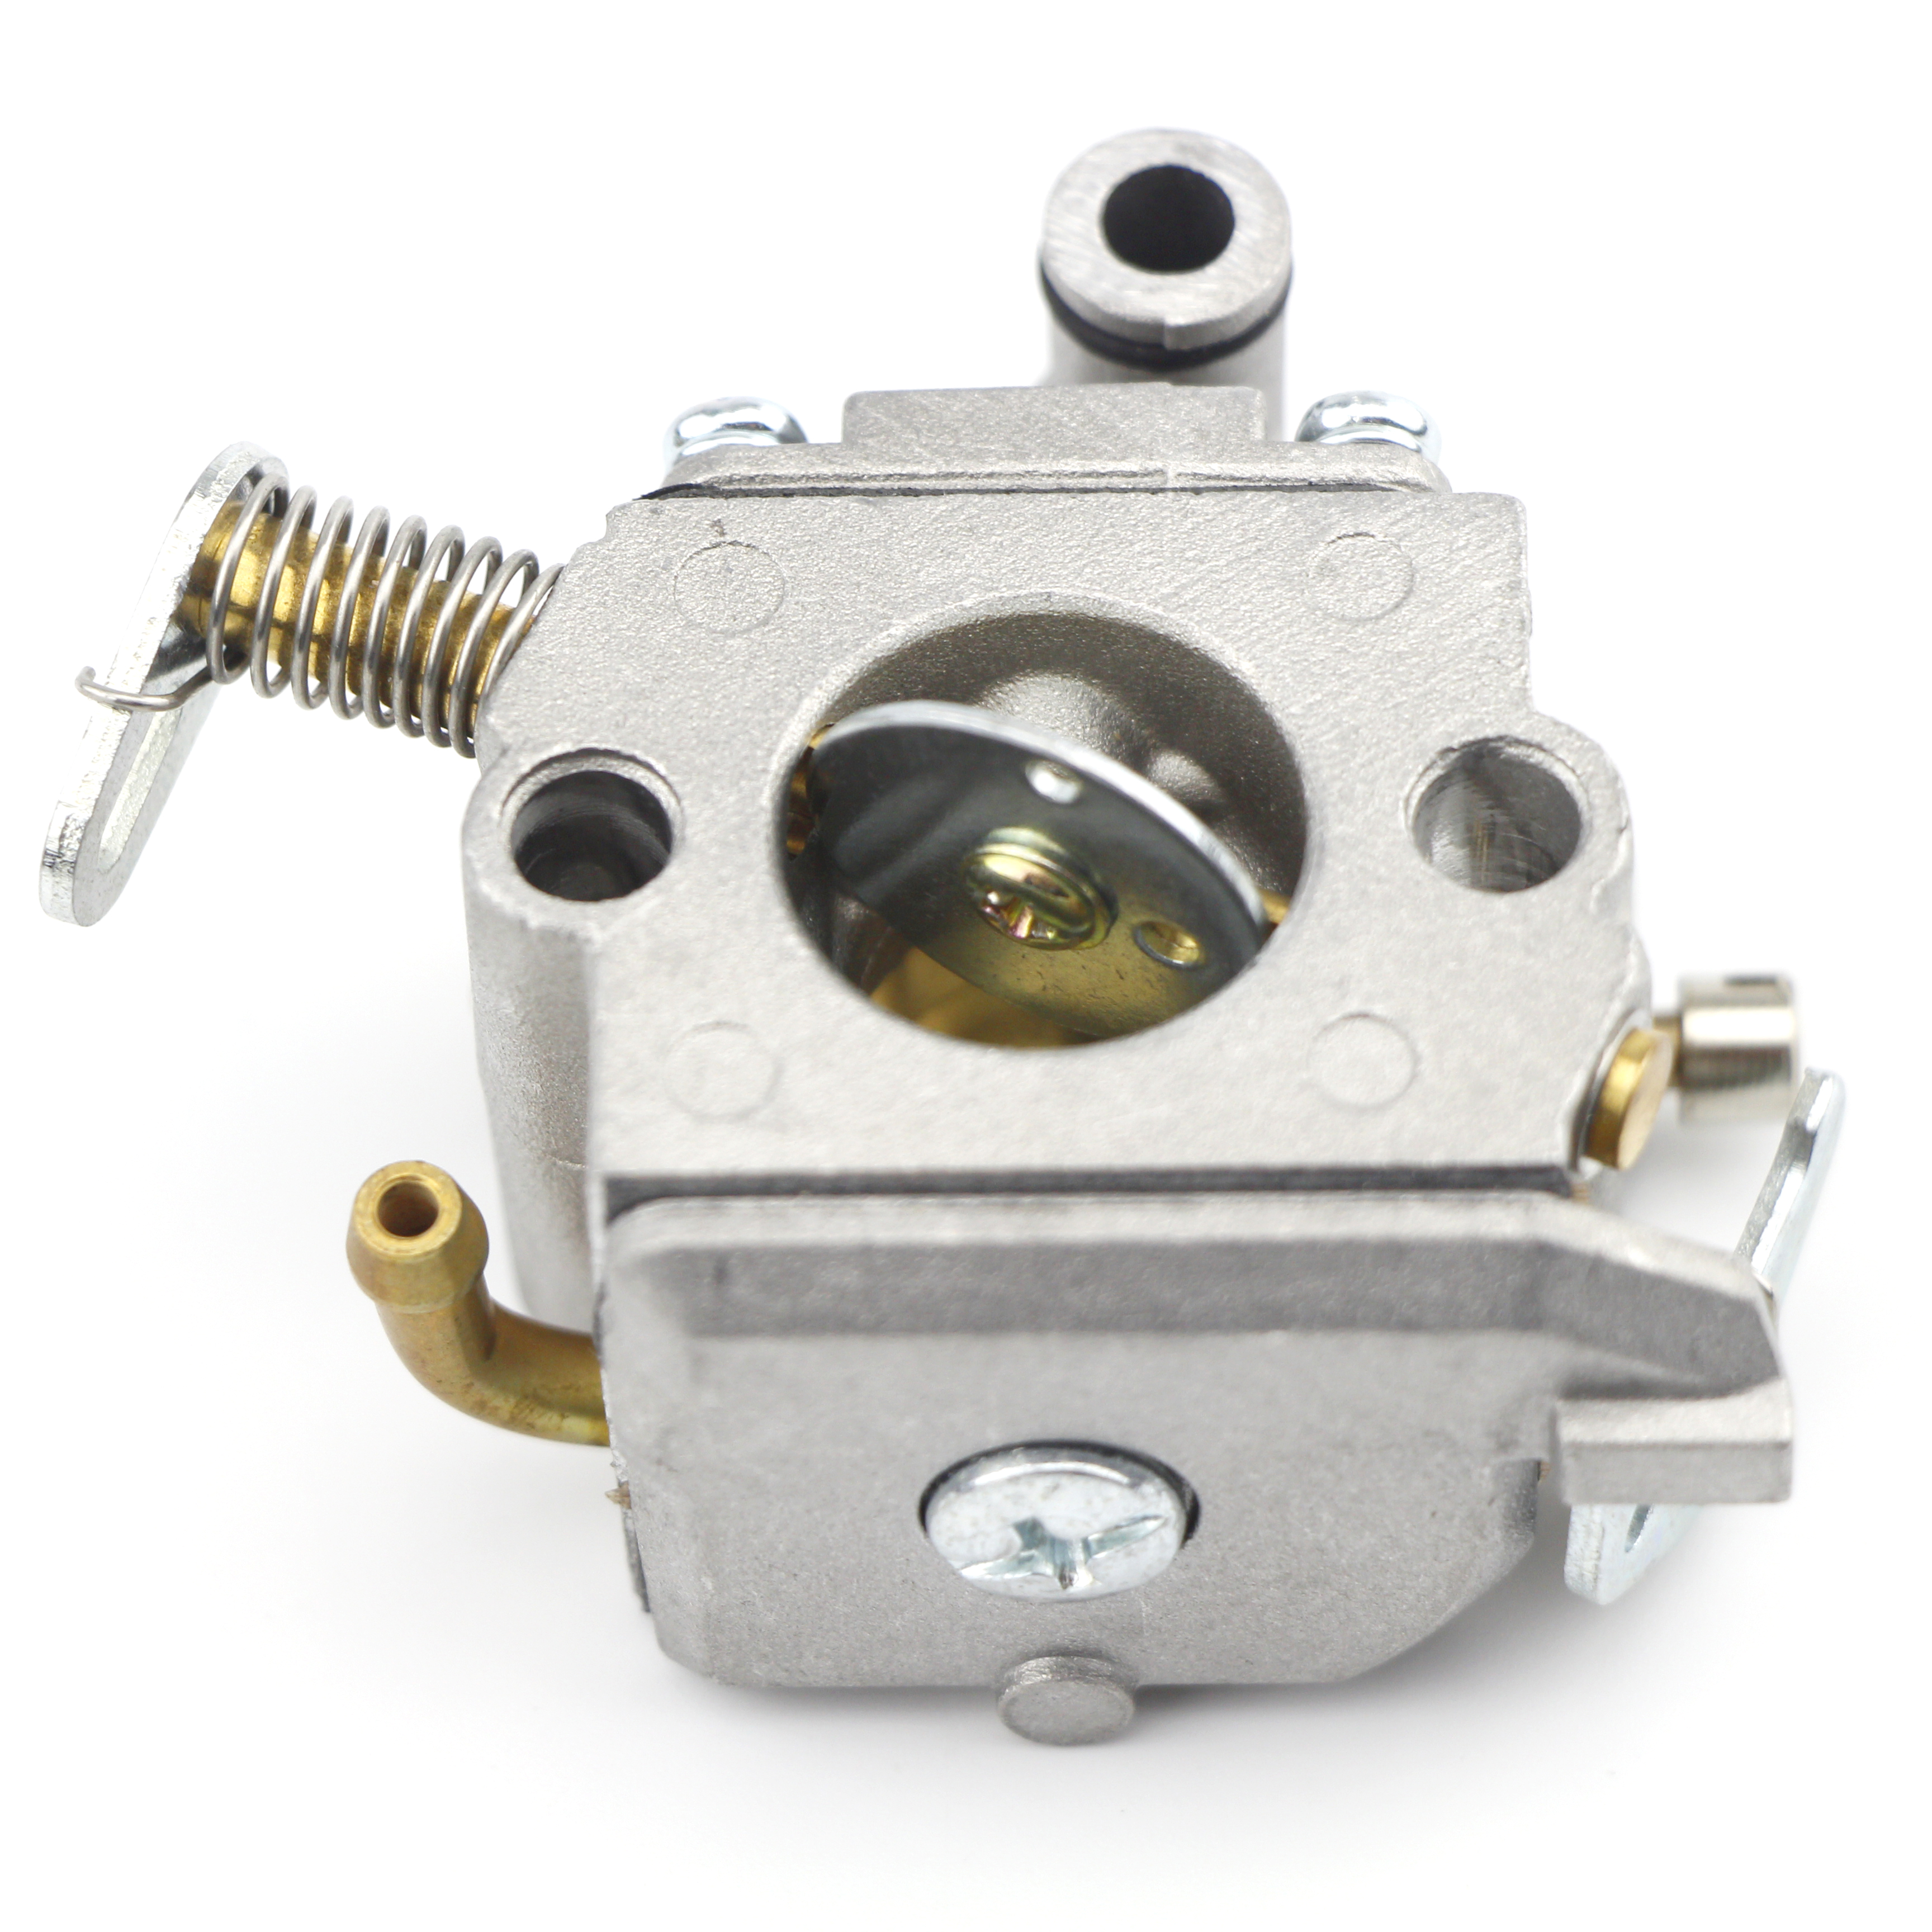 Details about   Carburetor Carb For Stihl 017 018 MS170 MS180 Parts Chainsaw Air Fuel Filter Kit